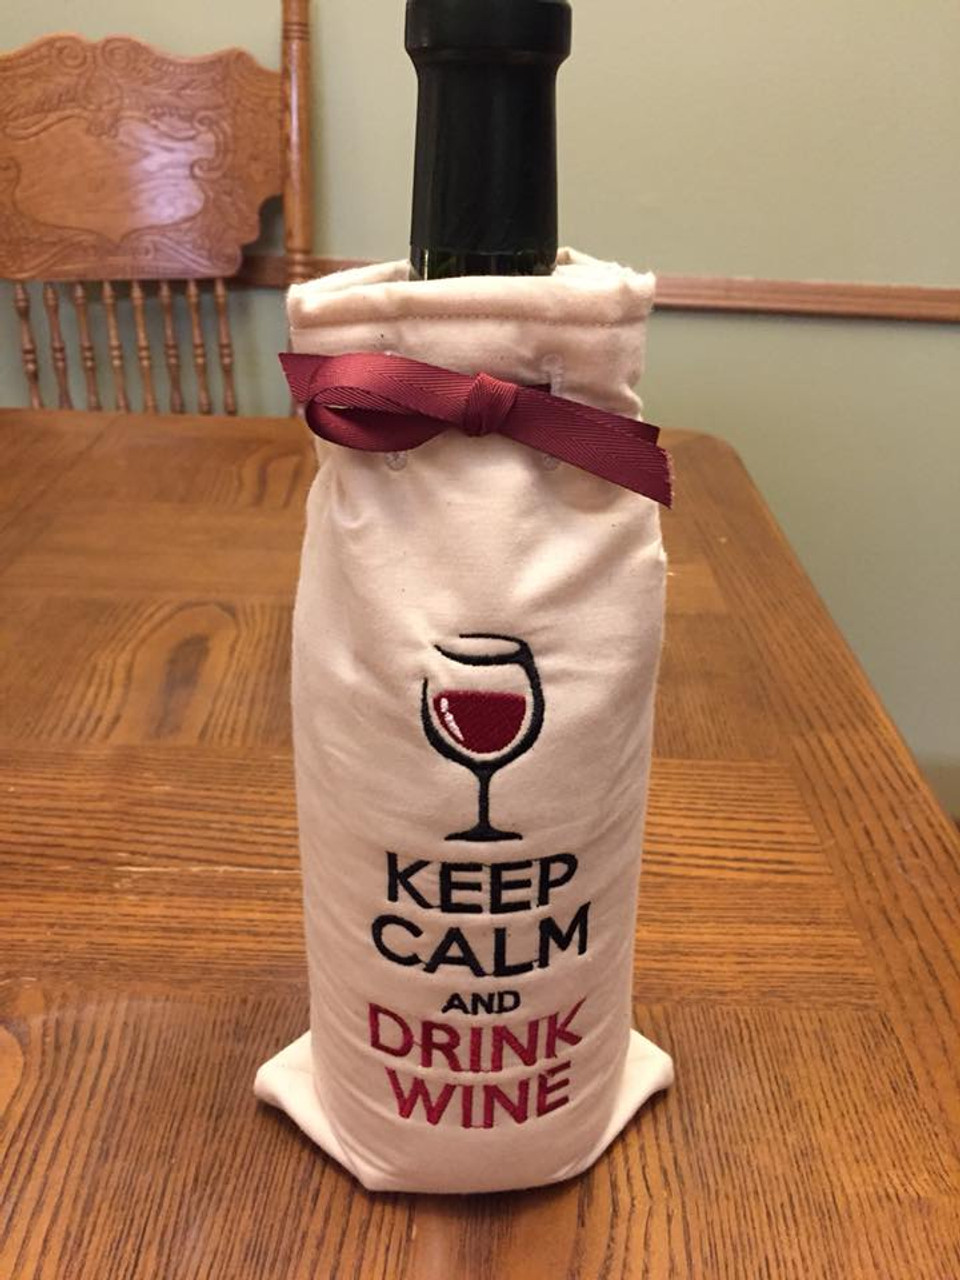 Wine Bottle Koozie with Zipper In The Hoop Template Embroidery Design